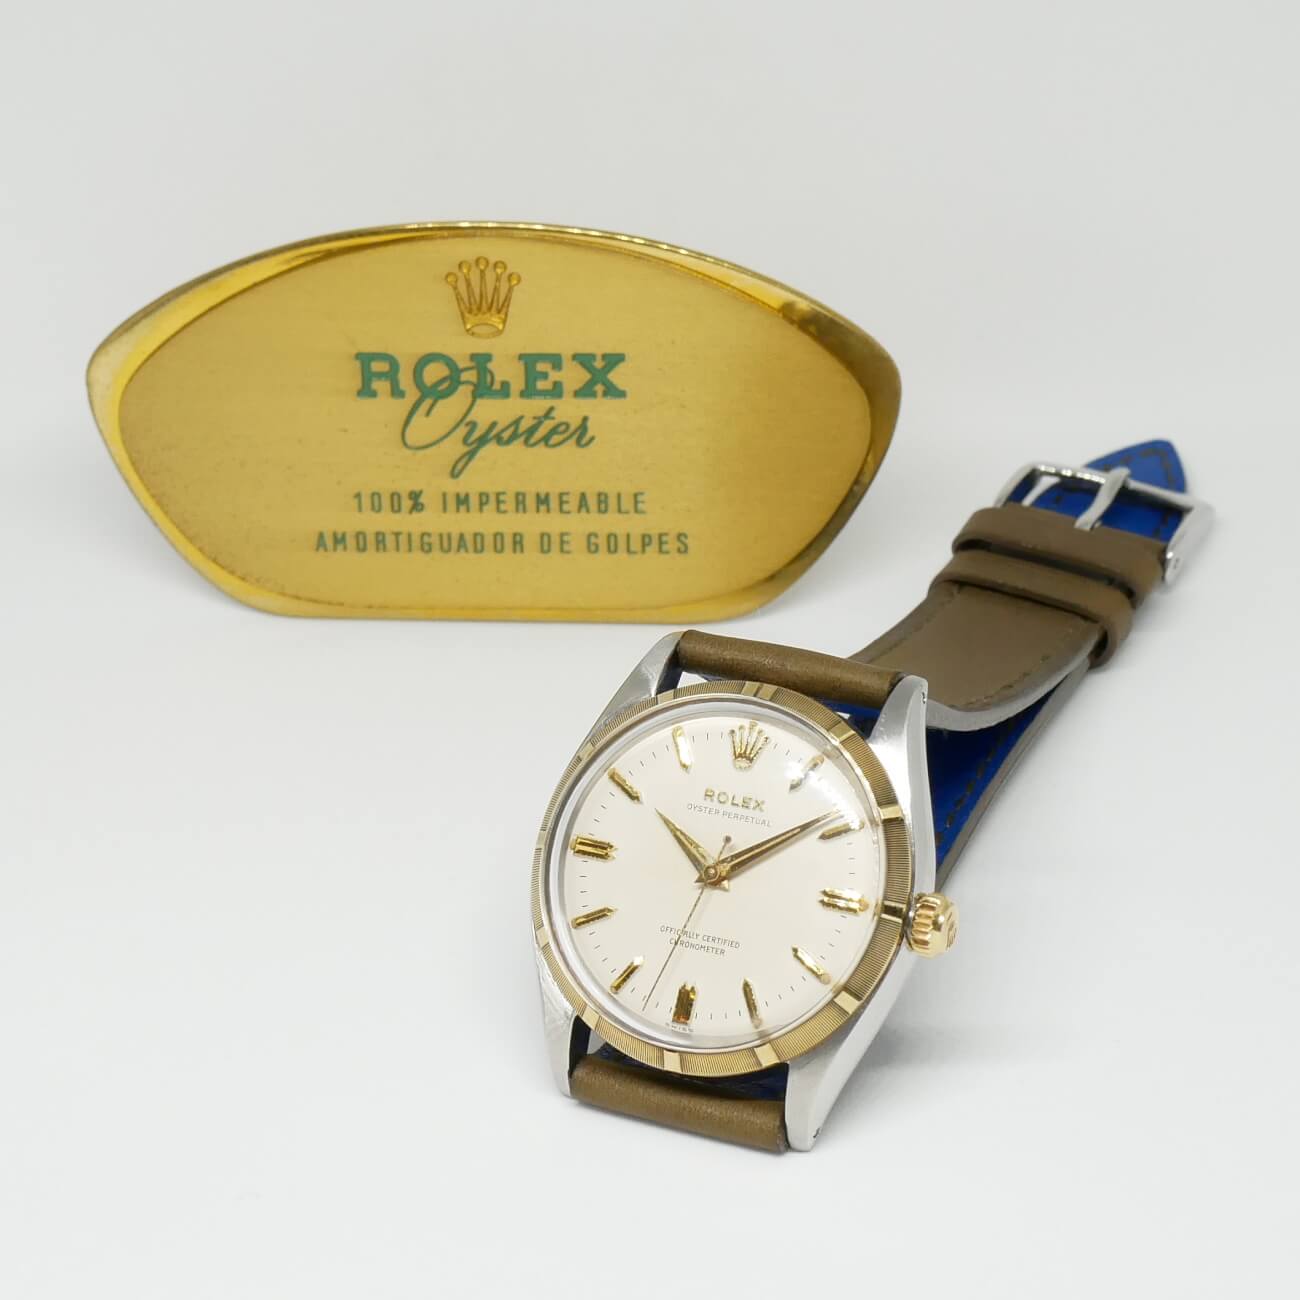 WATCH CASE & OTHER ROLEX SIGN STAND